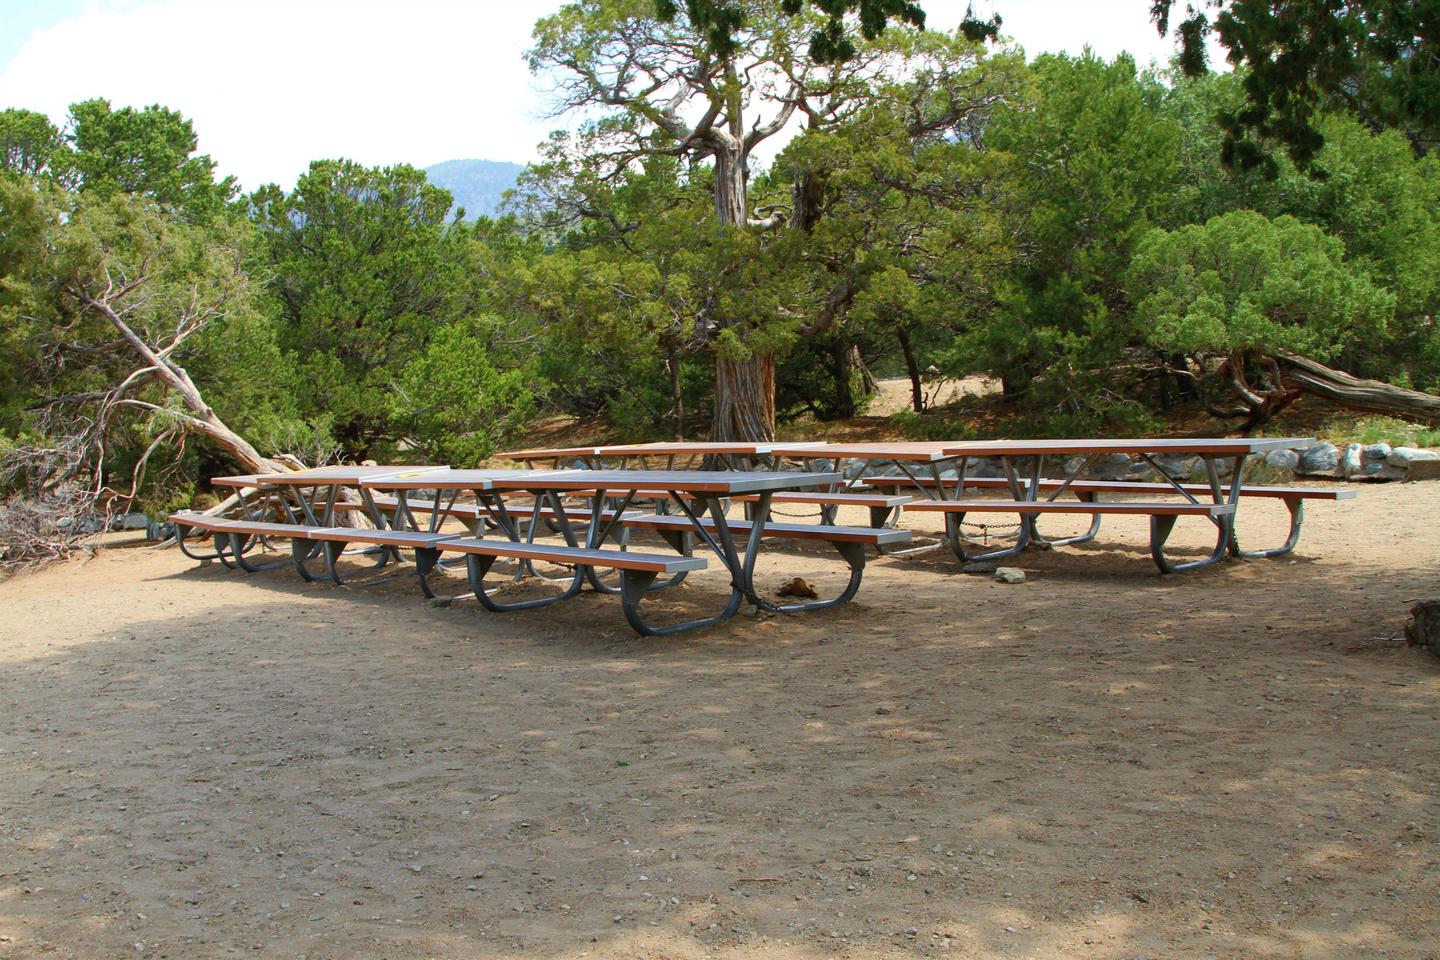 View of Group Site "A"s flotilla of picnic tables.Group Site A, Pinon Flats Campground